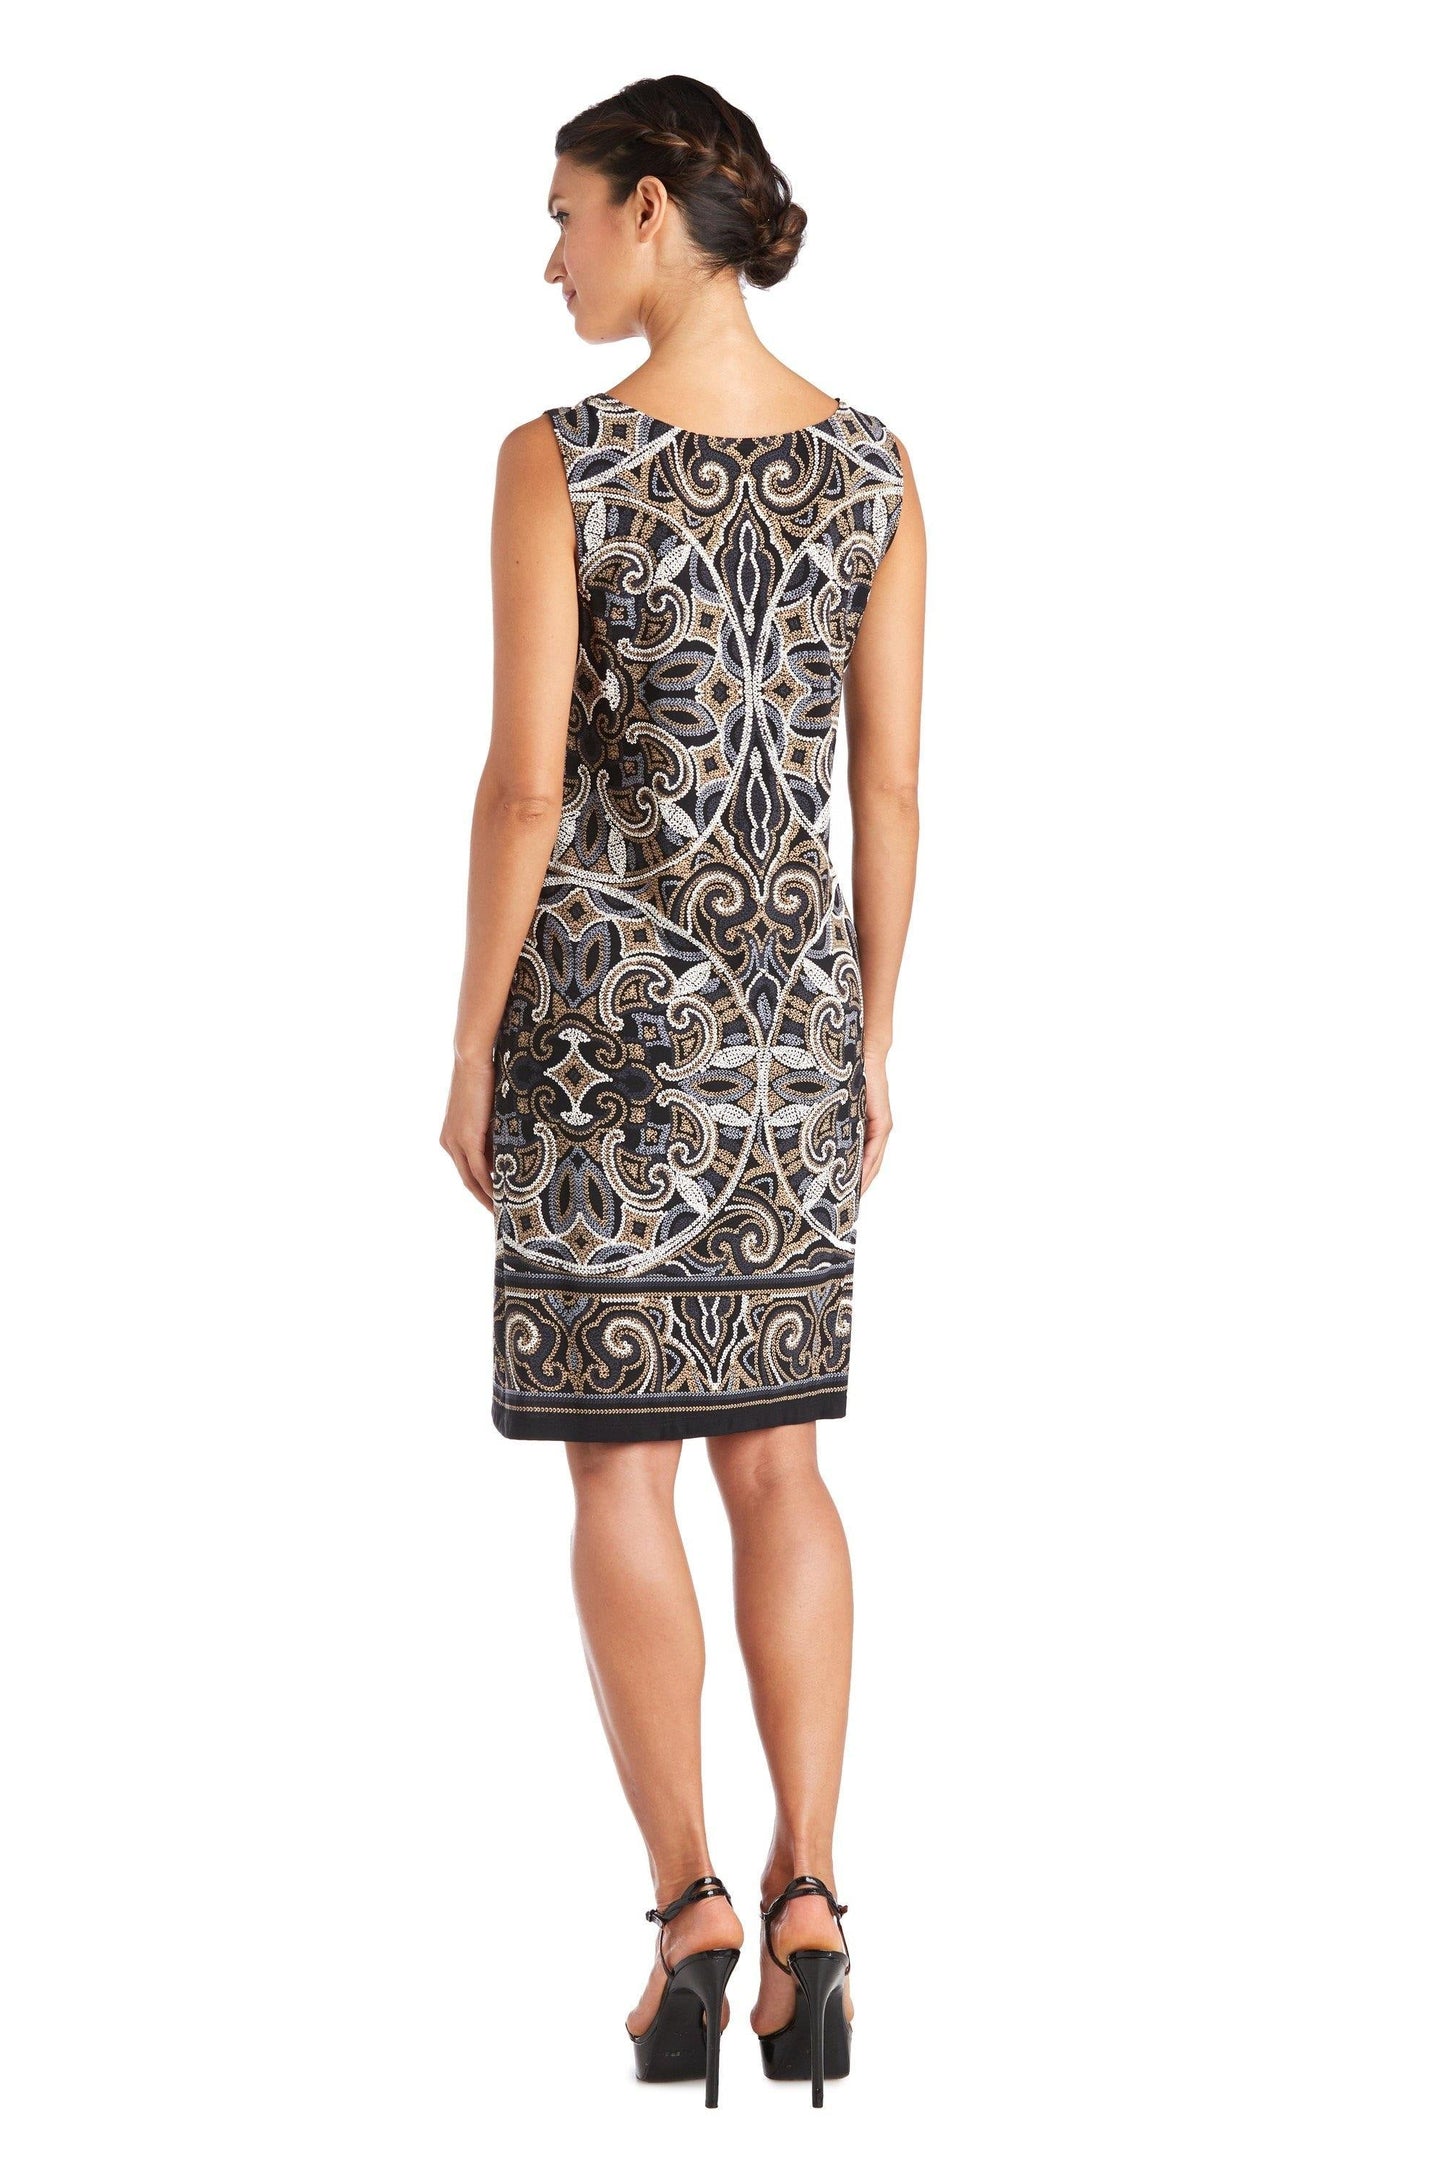 R&M Richards Two Piece Print Jacket Dress 7037 - The Dress Outlet